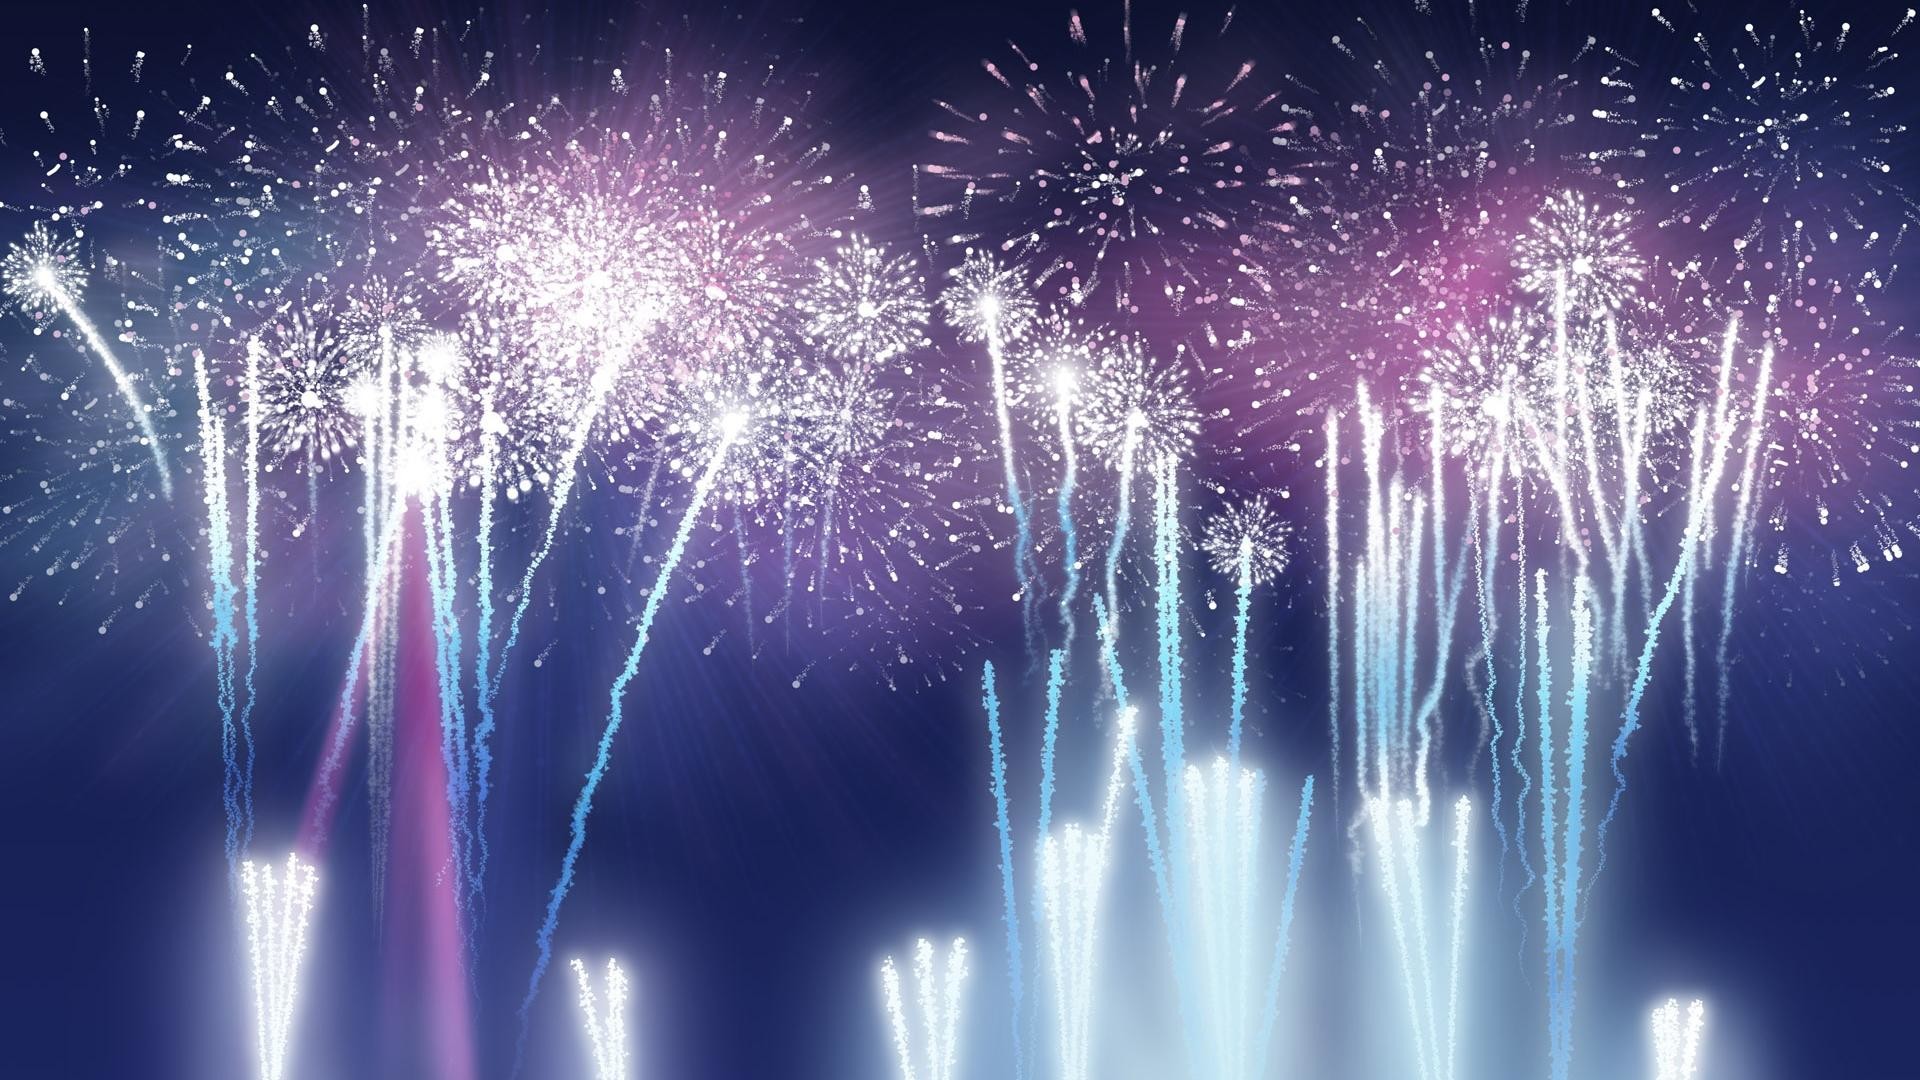 1920x1080  beautiful light fireworks background wide wallpapers:1280x800,1440x900,1680x1050  - hd backgrounds